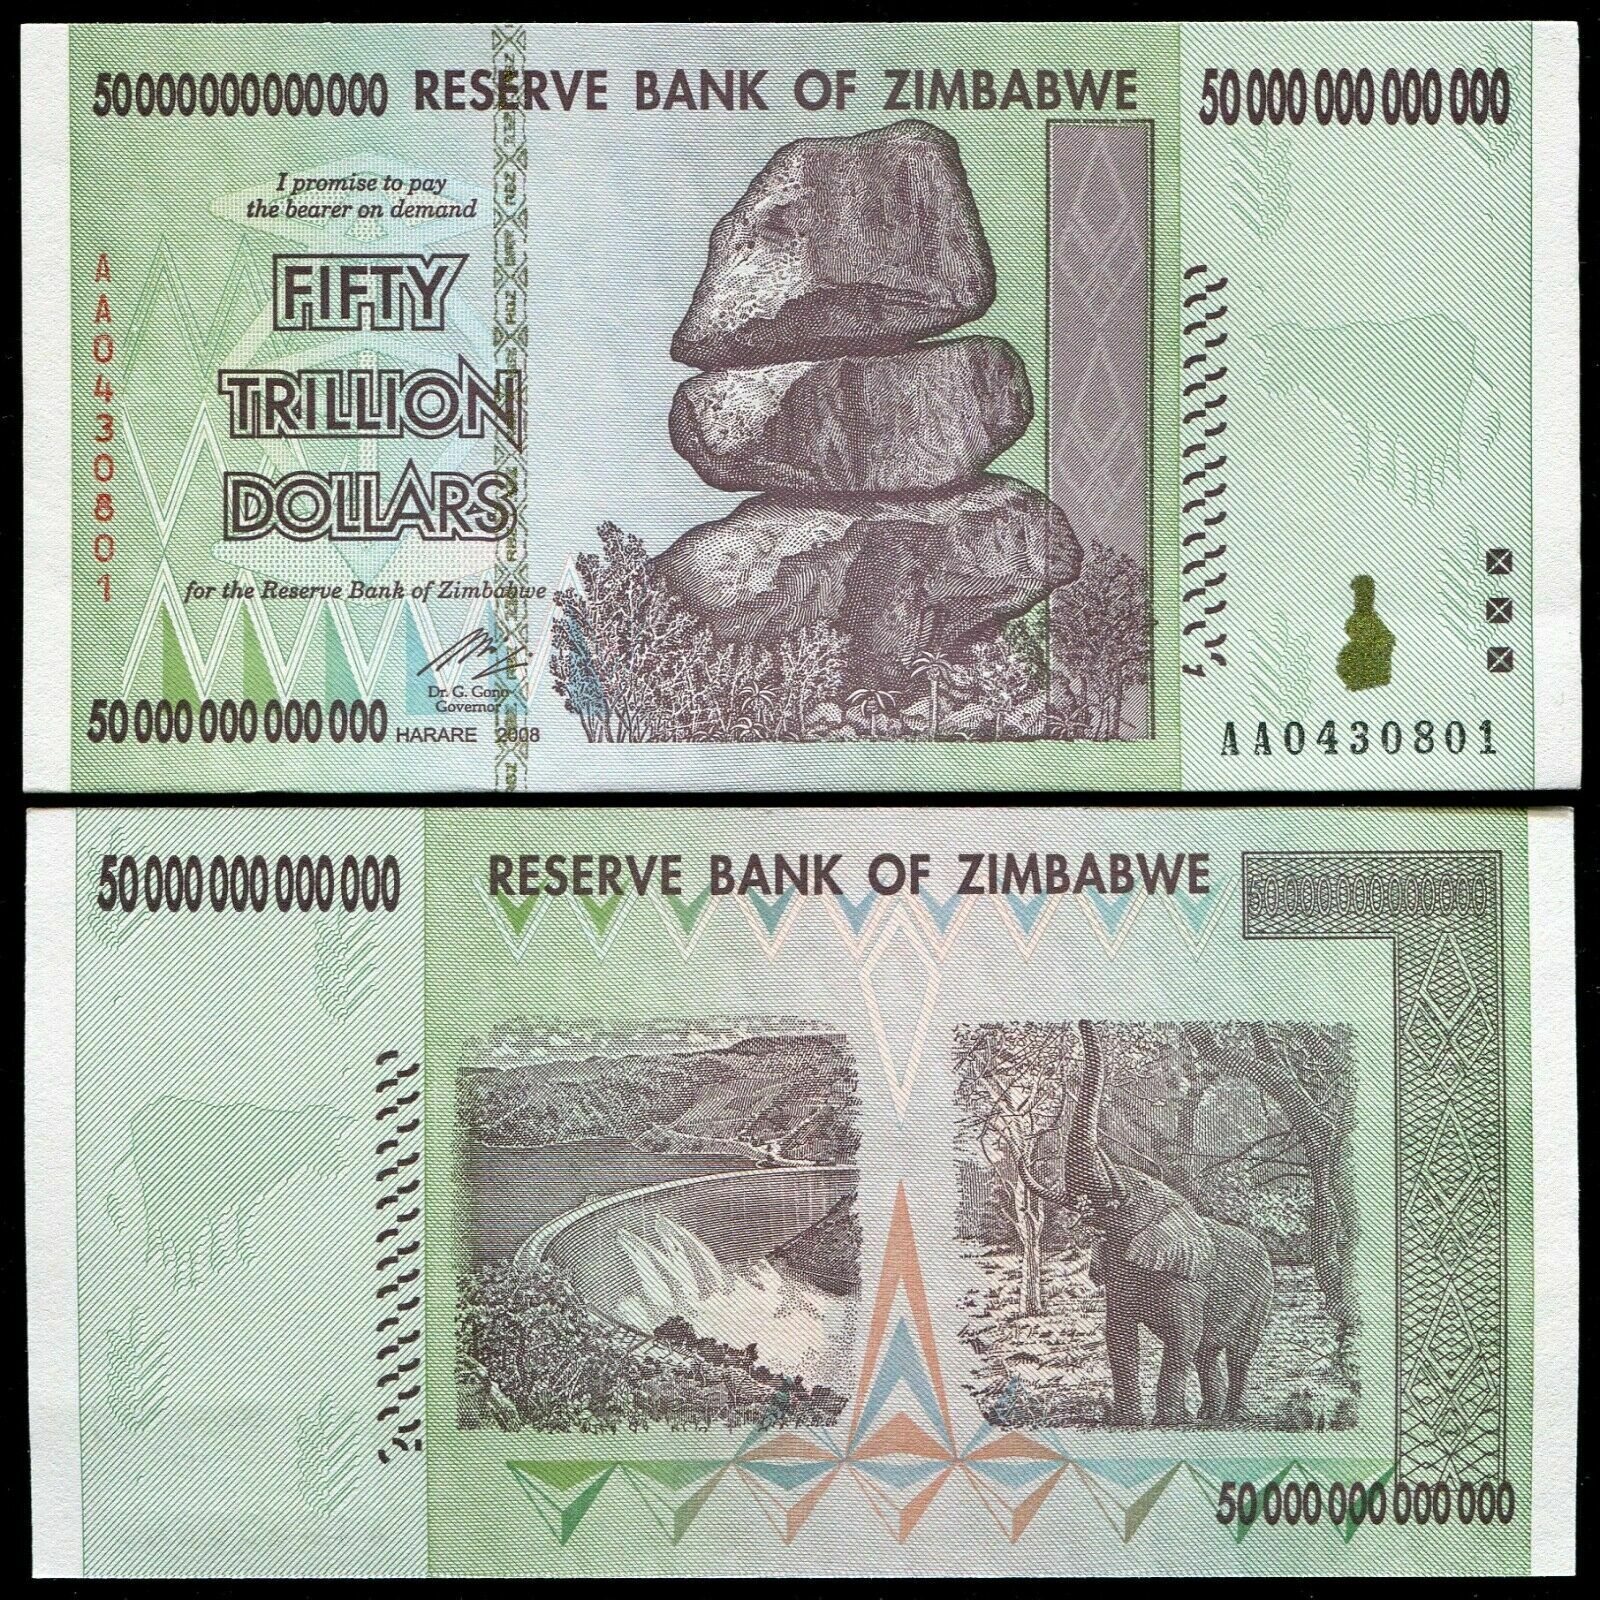 Zimbabwe 50 Trillion Dollar Banknote-unc Paper Currency